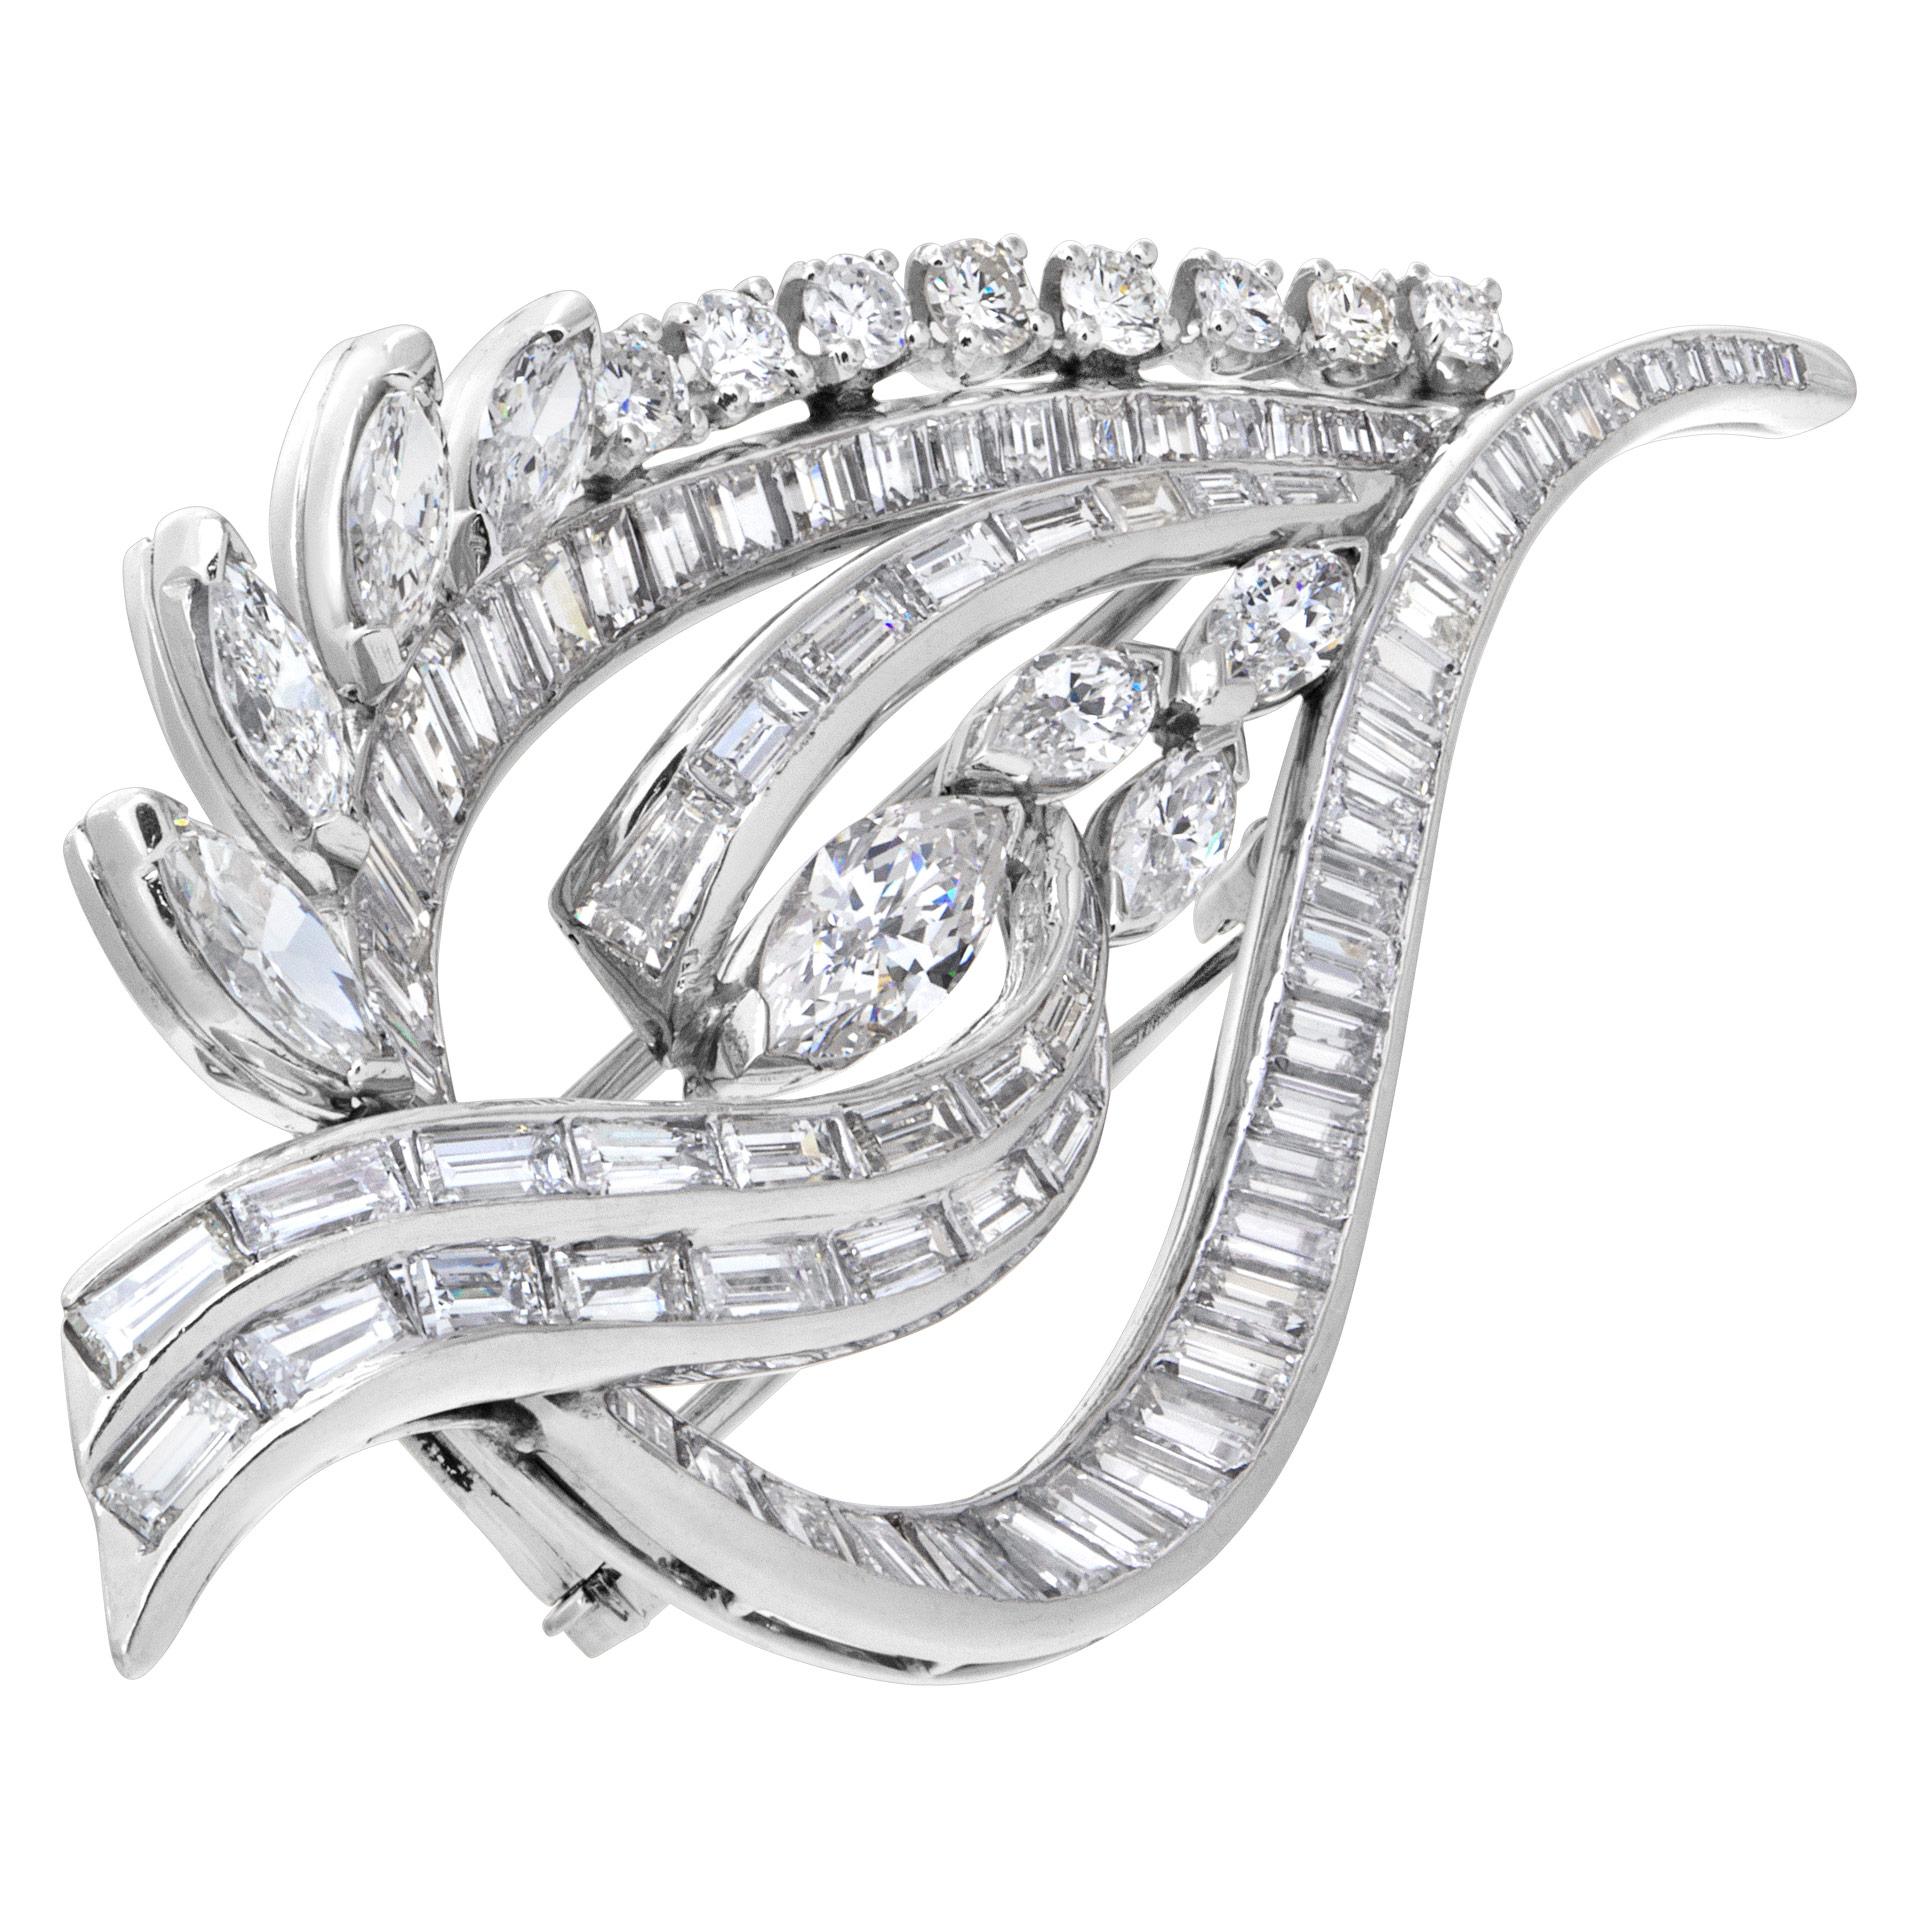 ESTIMATED RETAIL $21600 YOUR PRICE $12820 - Stunning diamond leaf pin/brooch in platinum with 6 carats in G-H color, VVS-VS clarity round, baguette & marquise diamonds. 